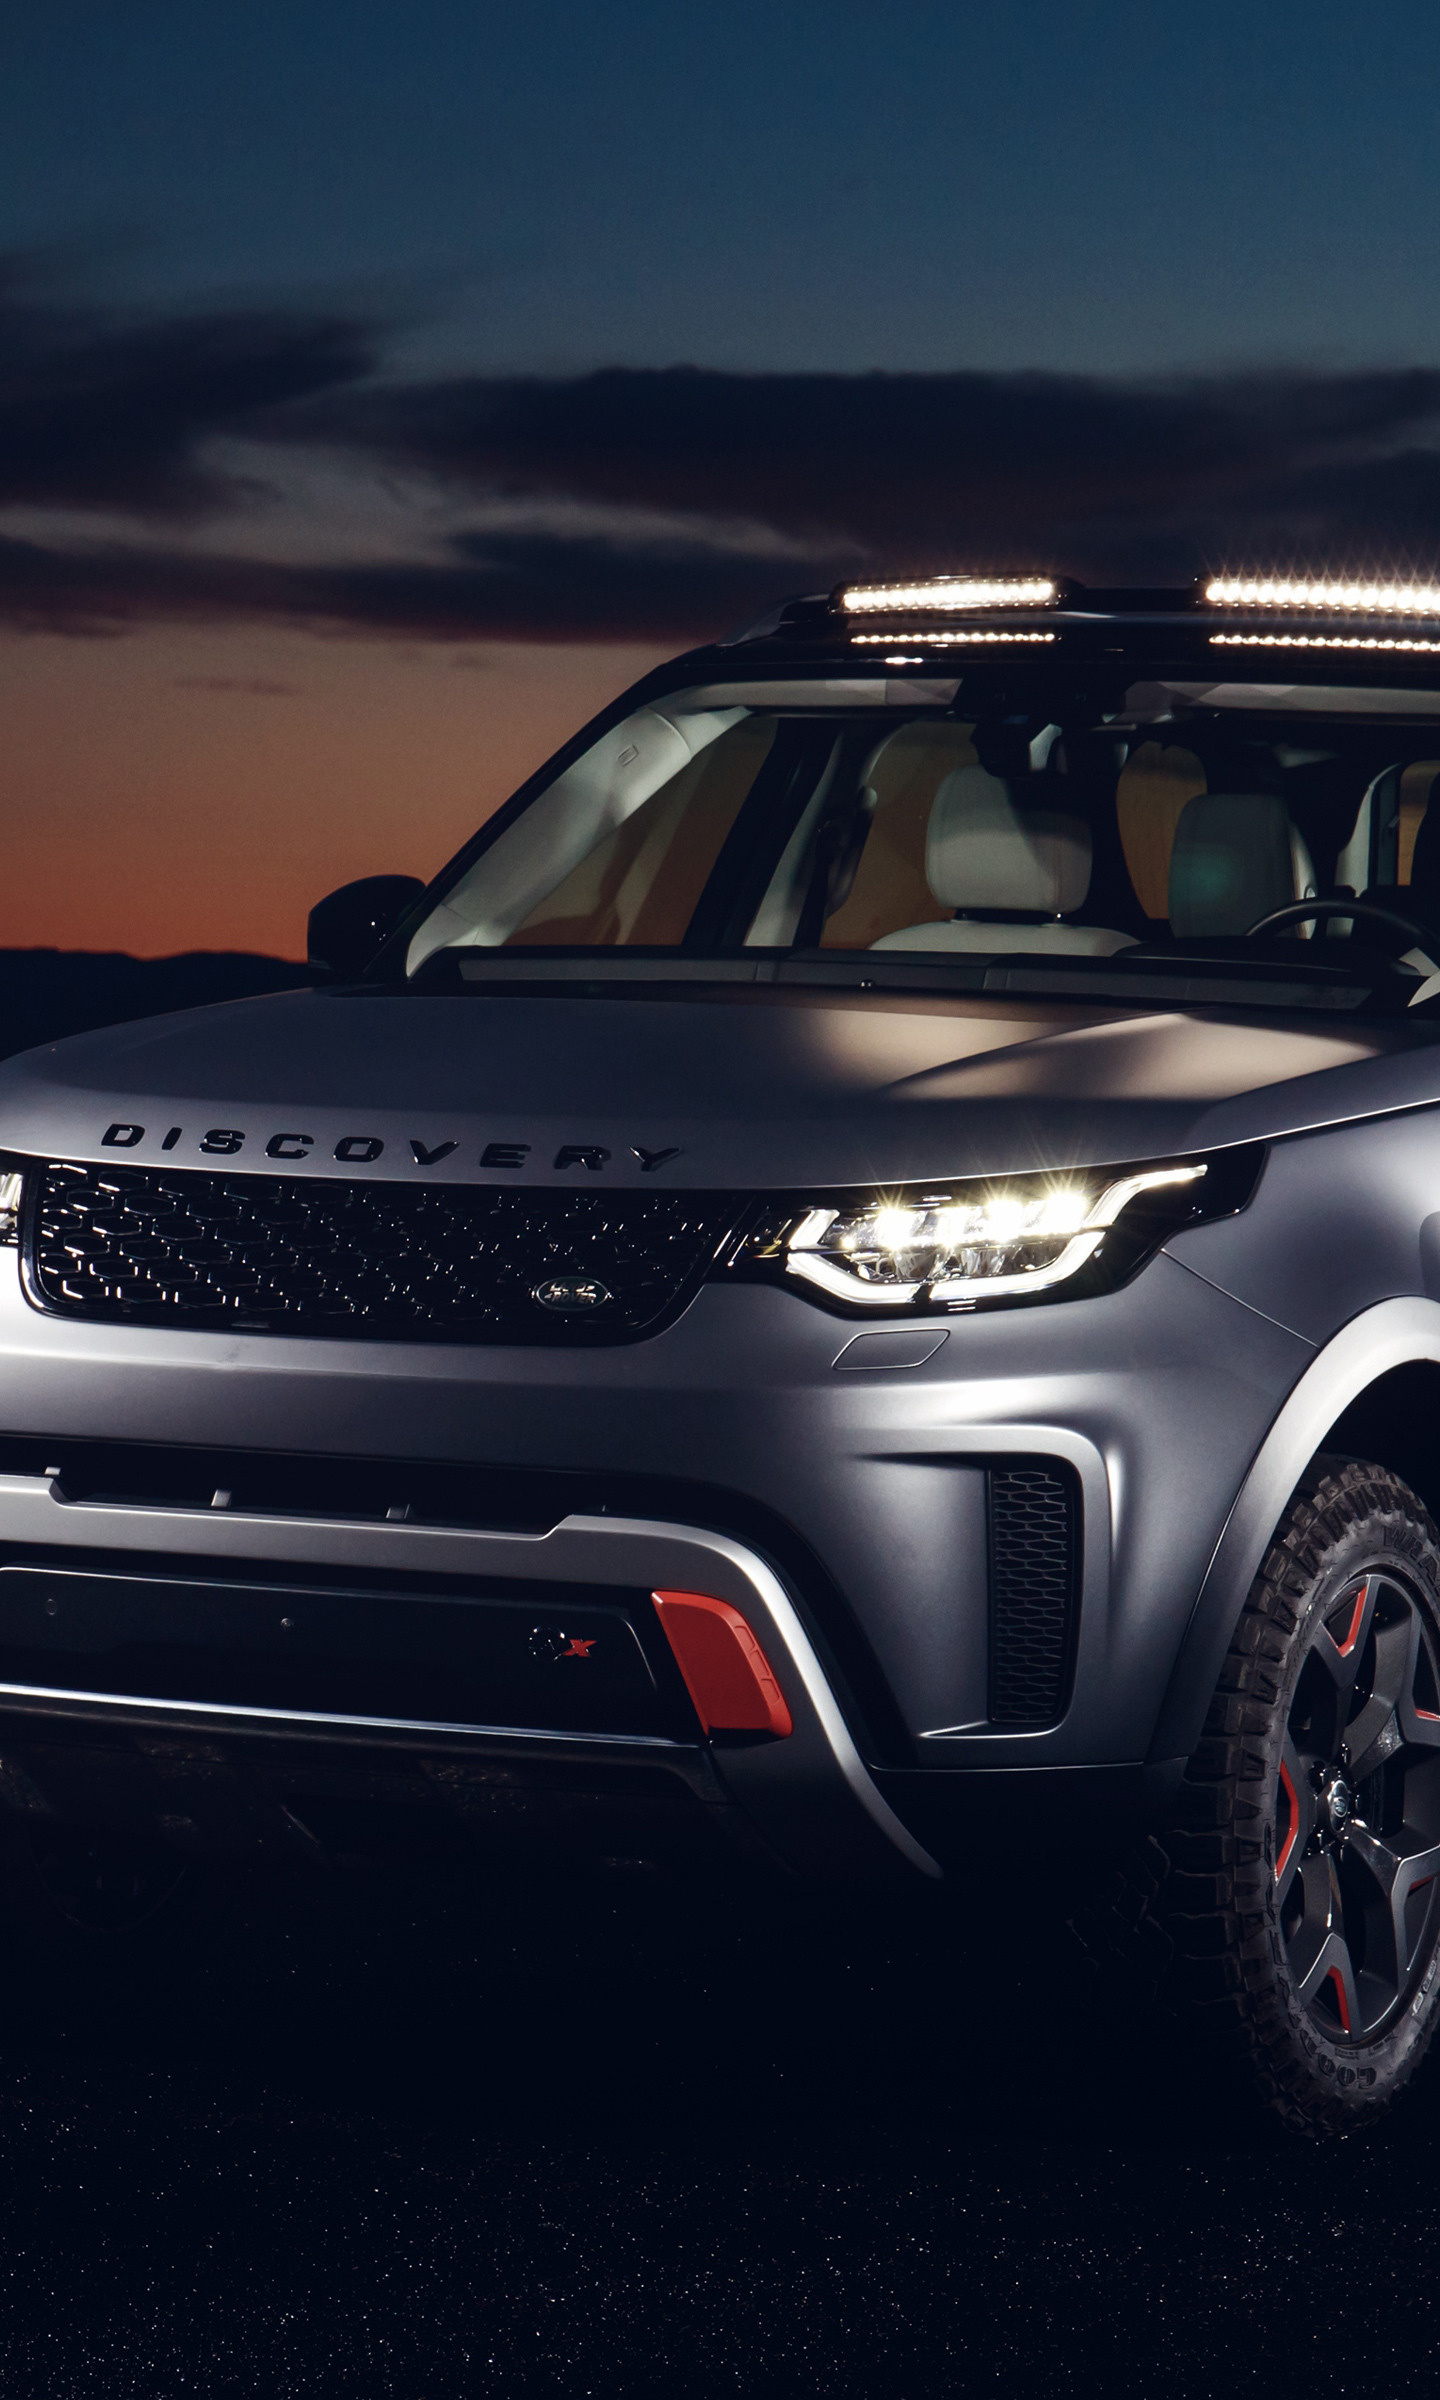 Land Rover Discovery, SVX SUV, High-resolution wallpaper, Mobile download, 1440x2400 HD Handy